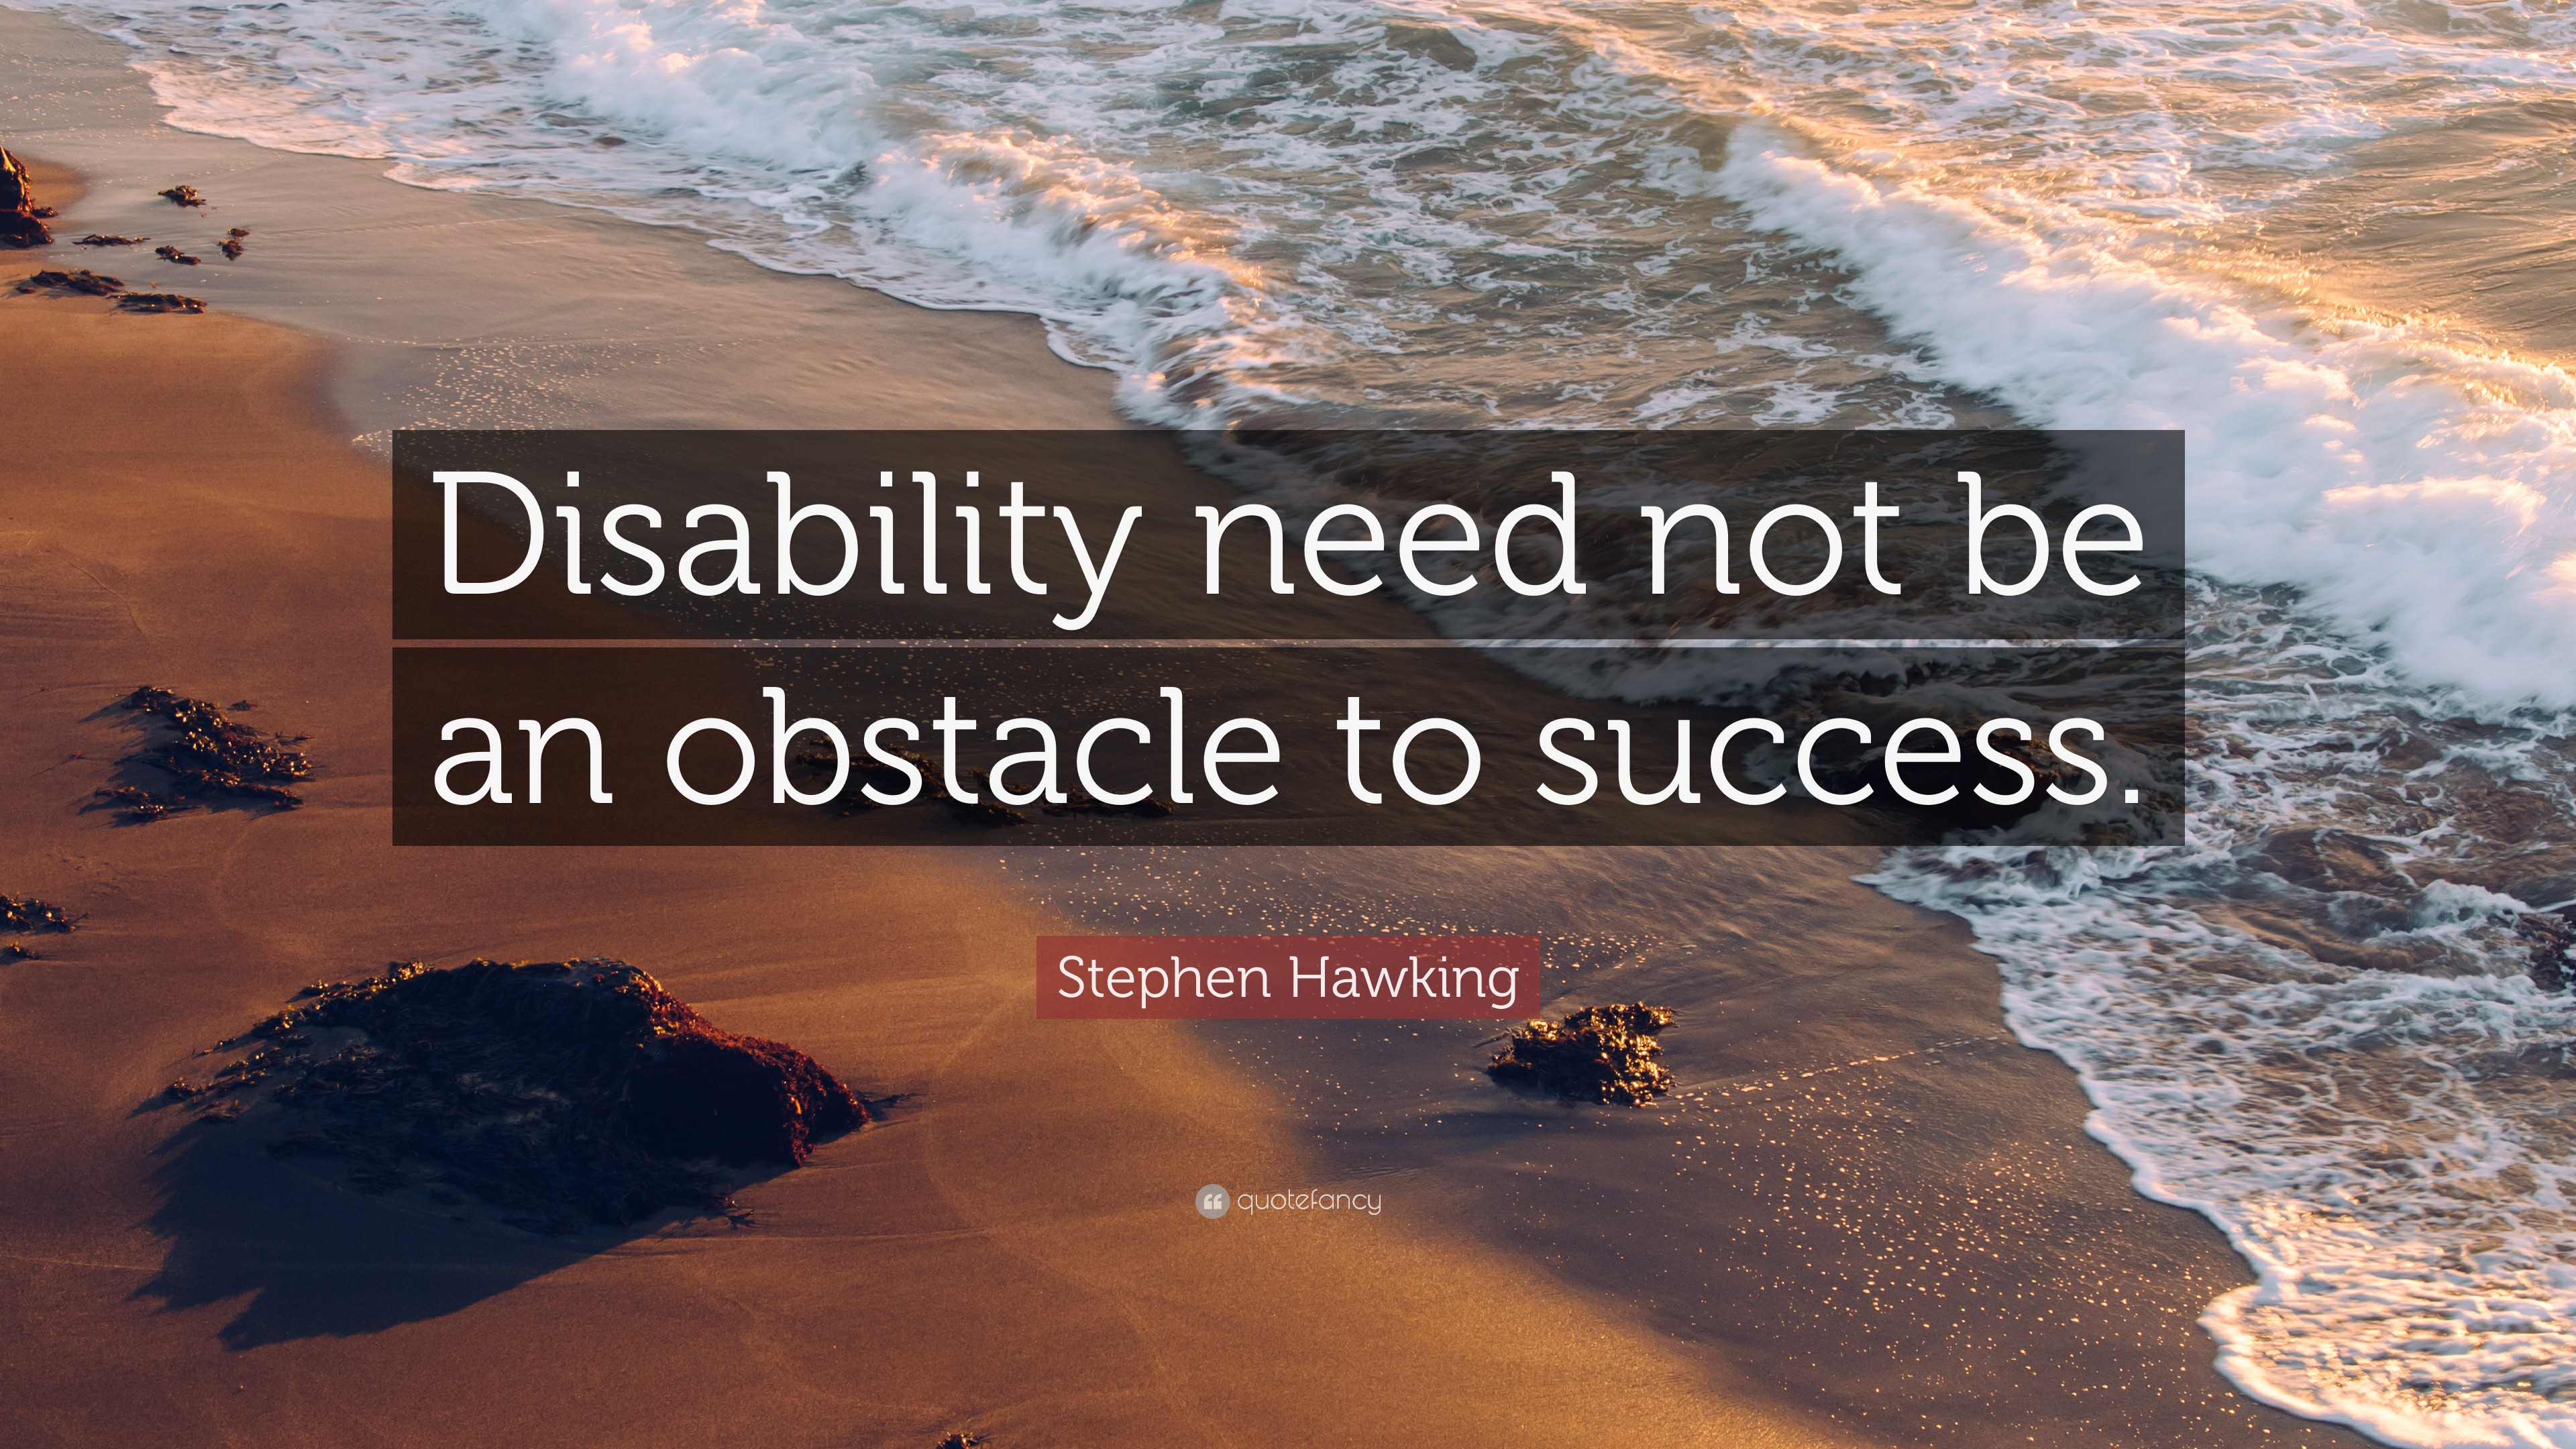 essay on disability not an obstacle to success